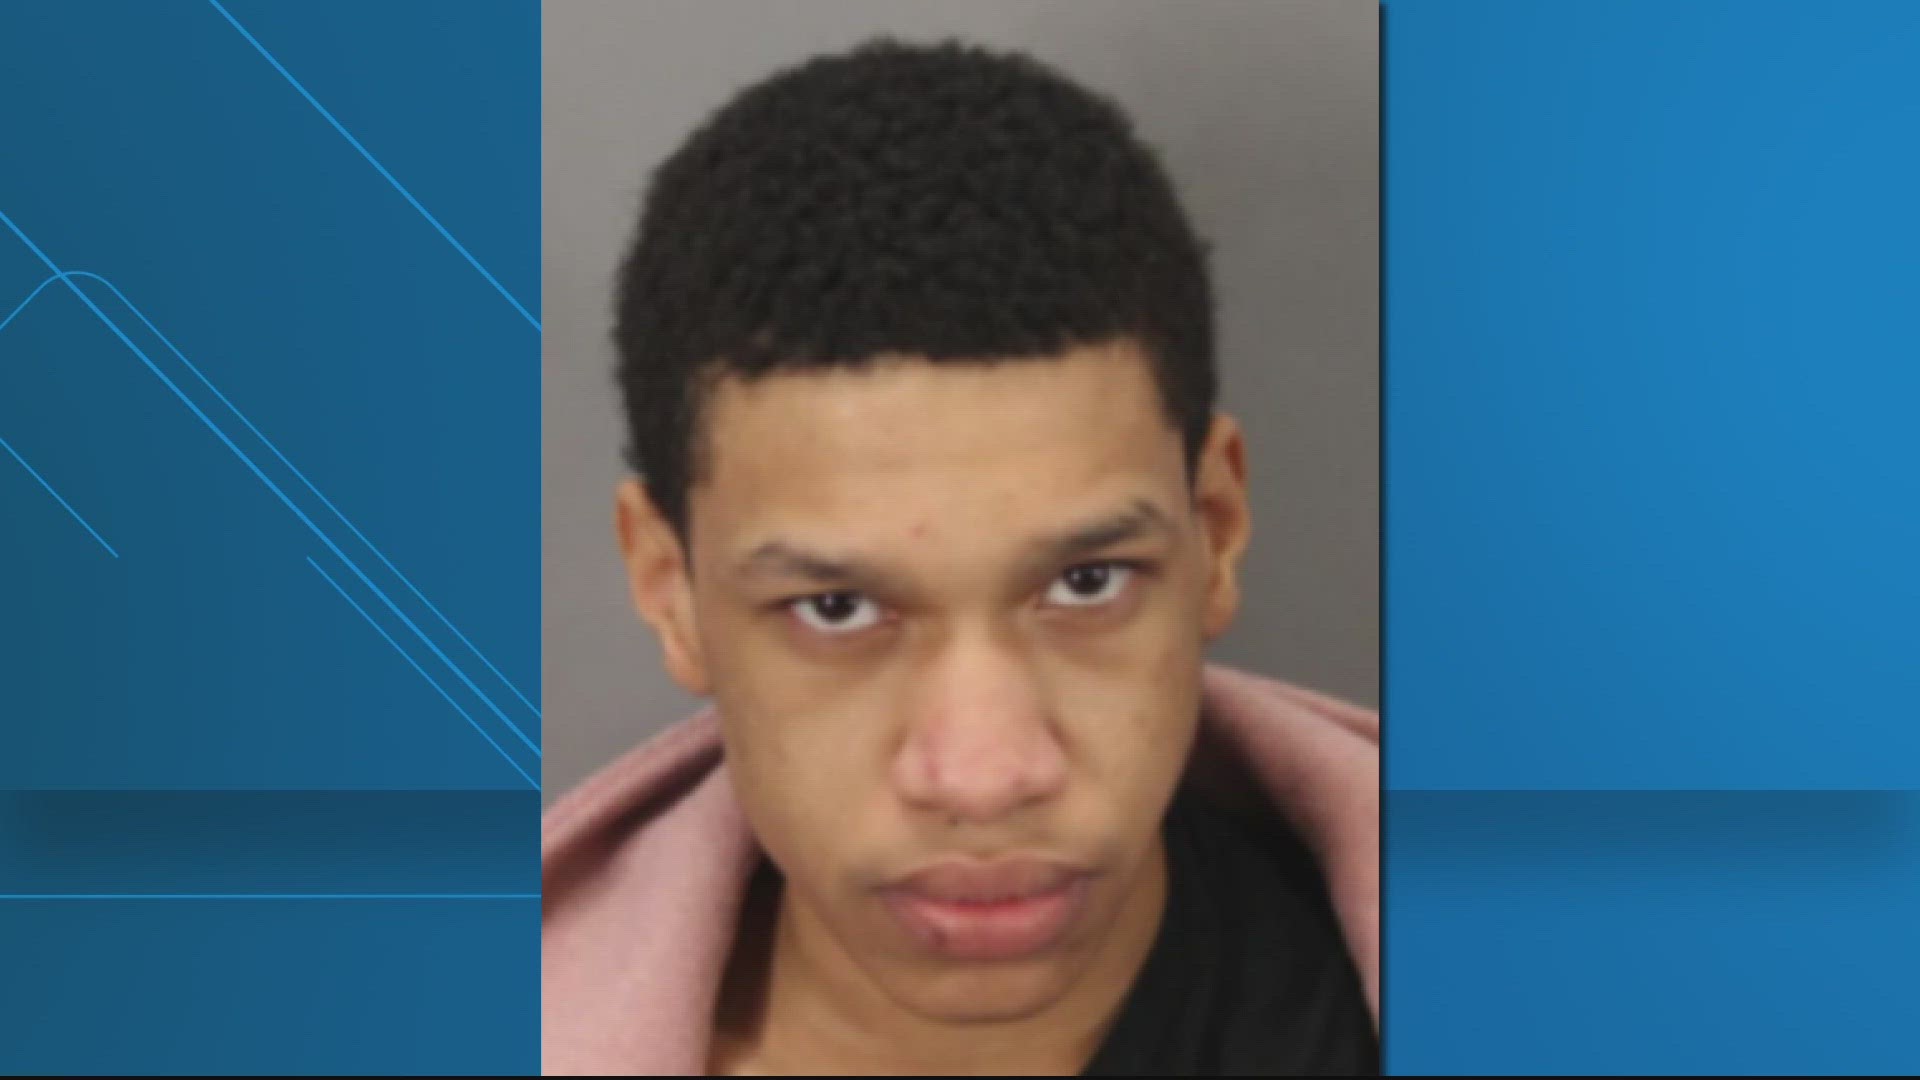 Jovan Terrell Williams, 18, is one of two people police say opened fire at the university wounding five people. A 17-year-old has already been arrested.